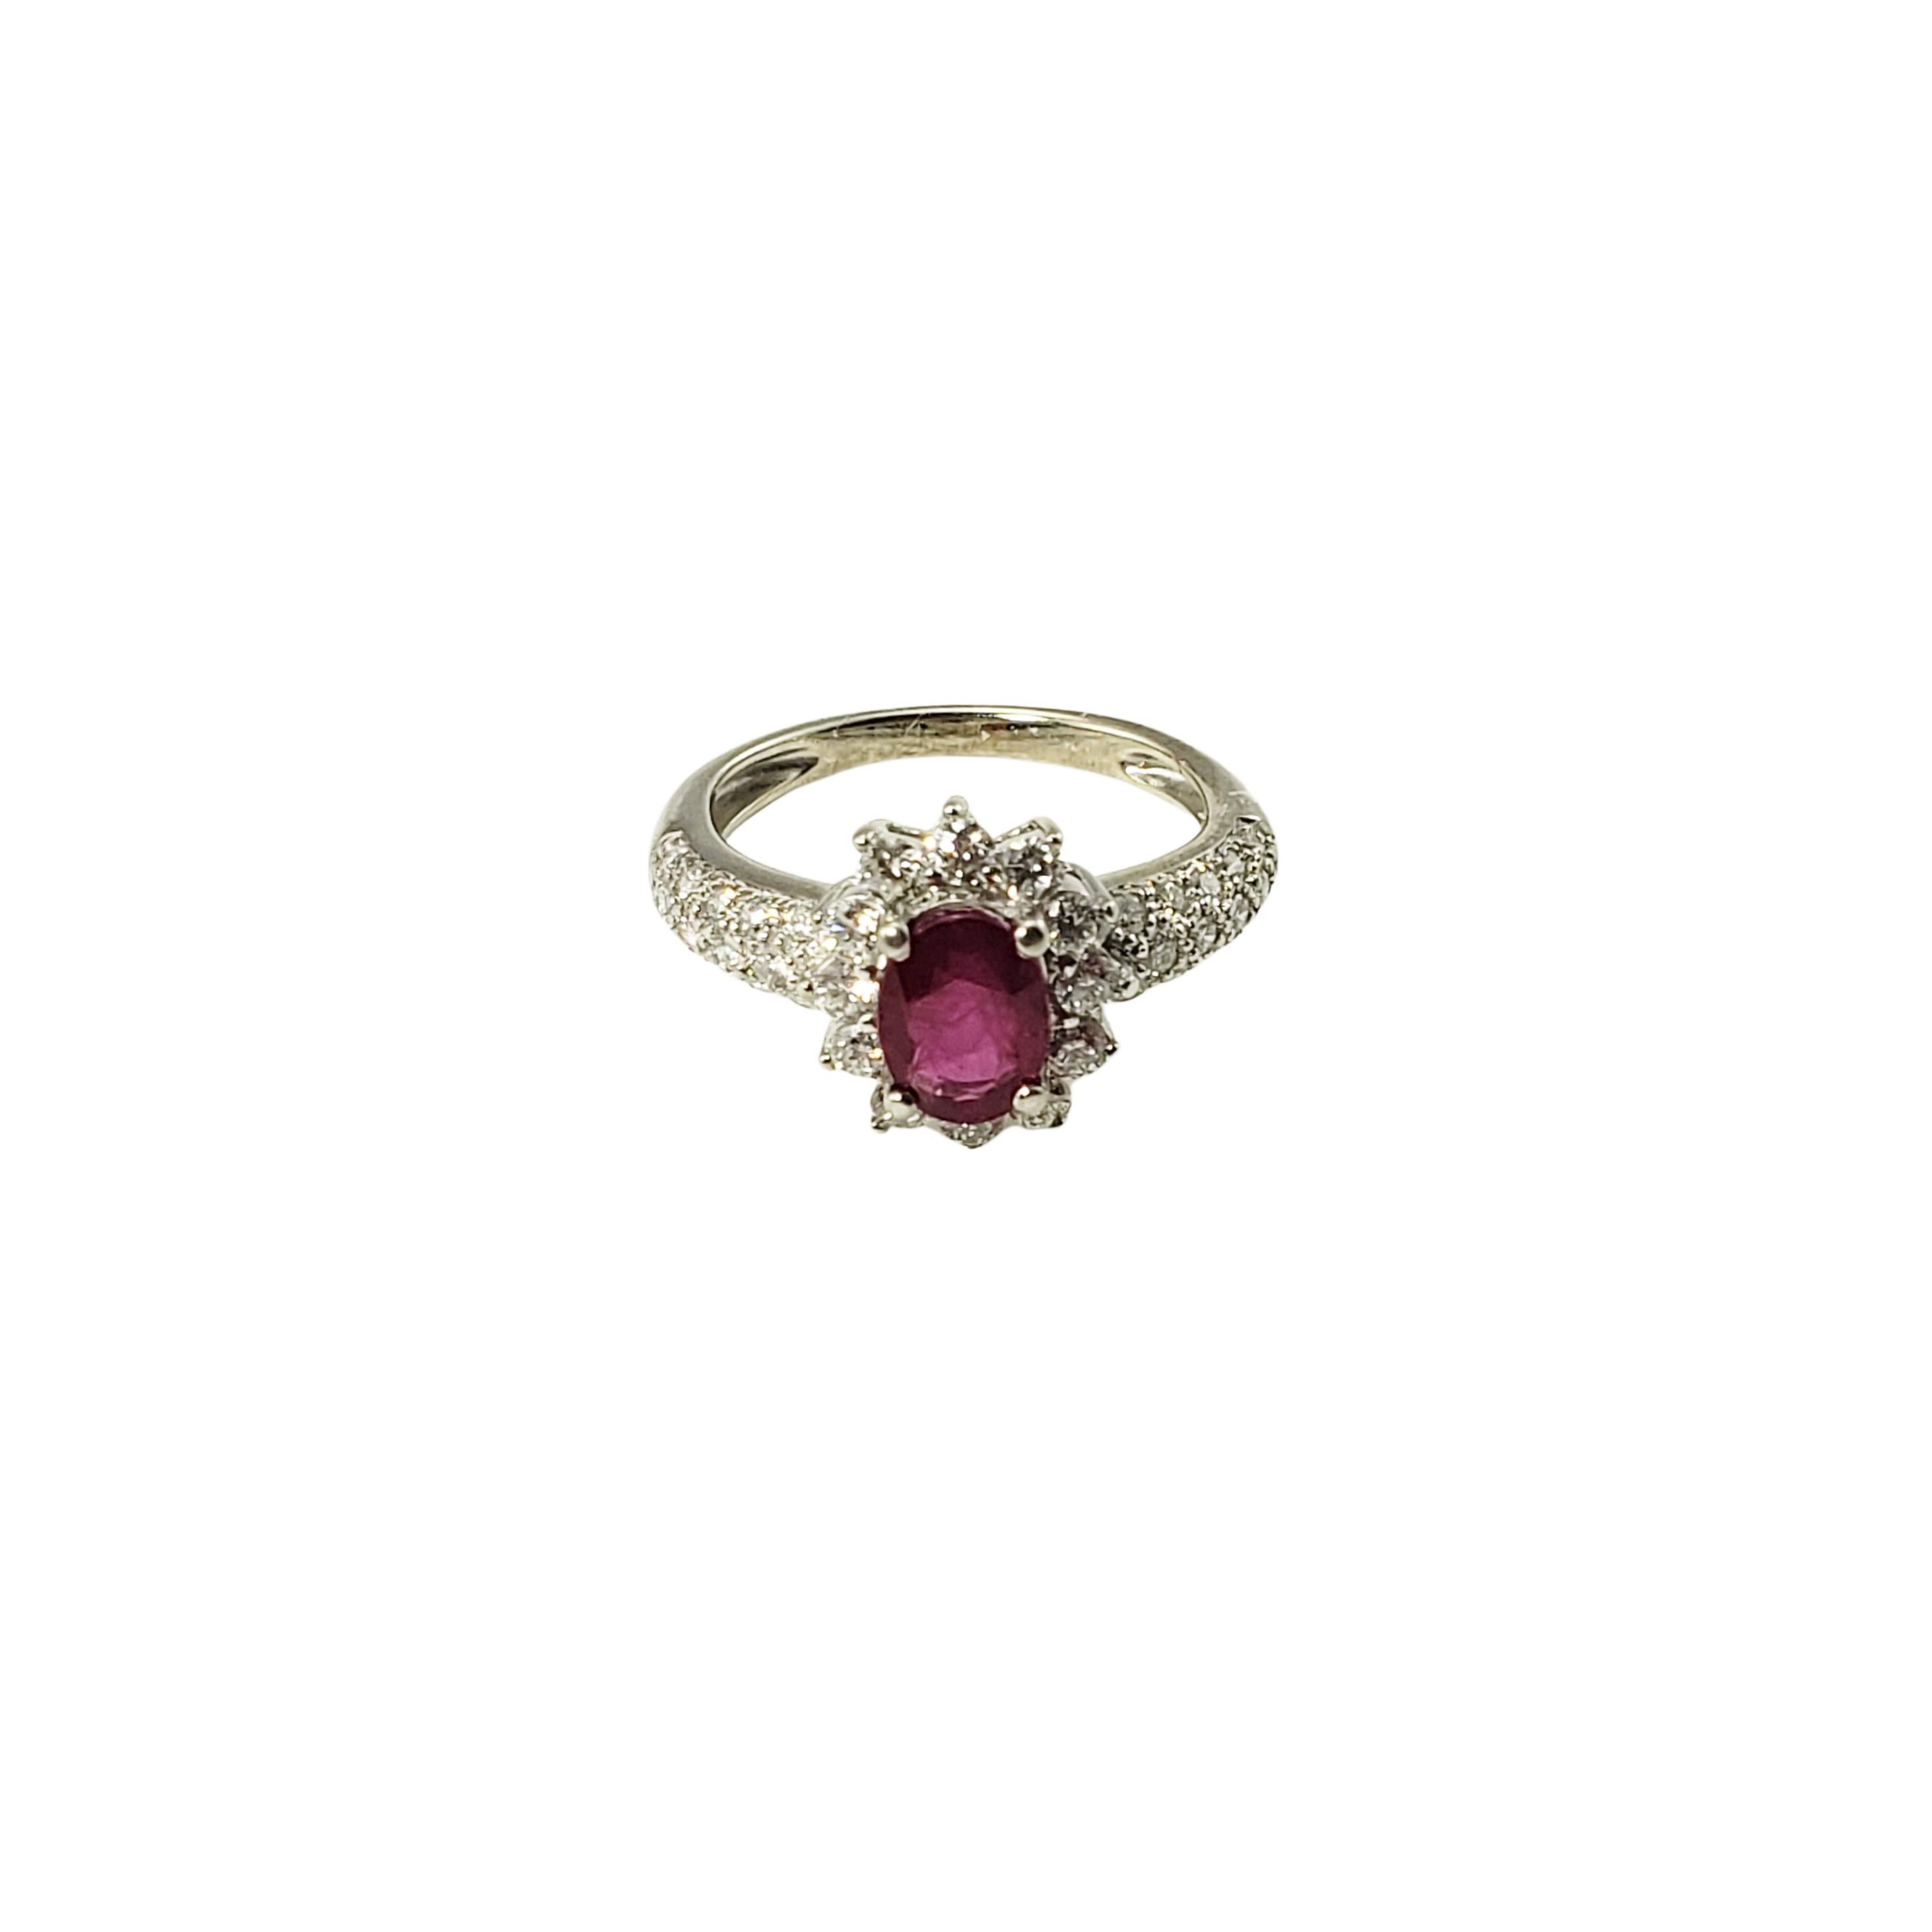 14 Karat White Gold Ruby and Diamond Ring Size 4.5 GAI Certified-

This lovely ring features one oval ruby (7 mm x 5 mm) and 42 round brilliant cut diamond set in classic 14K white gold.  Top of ring measures 11 mm x 10 mm.  Shank:  2 mm.

Ruby